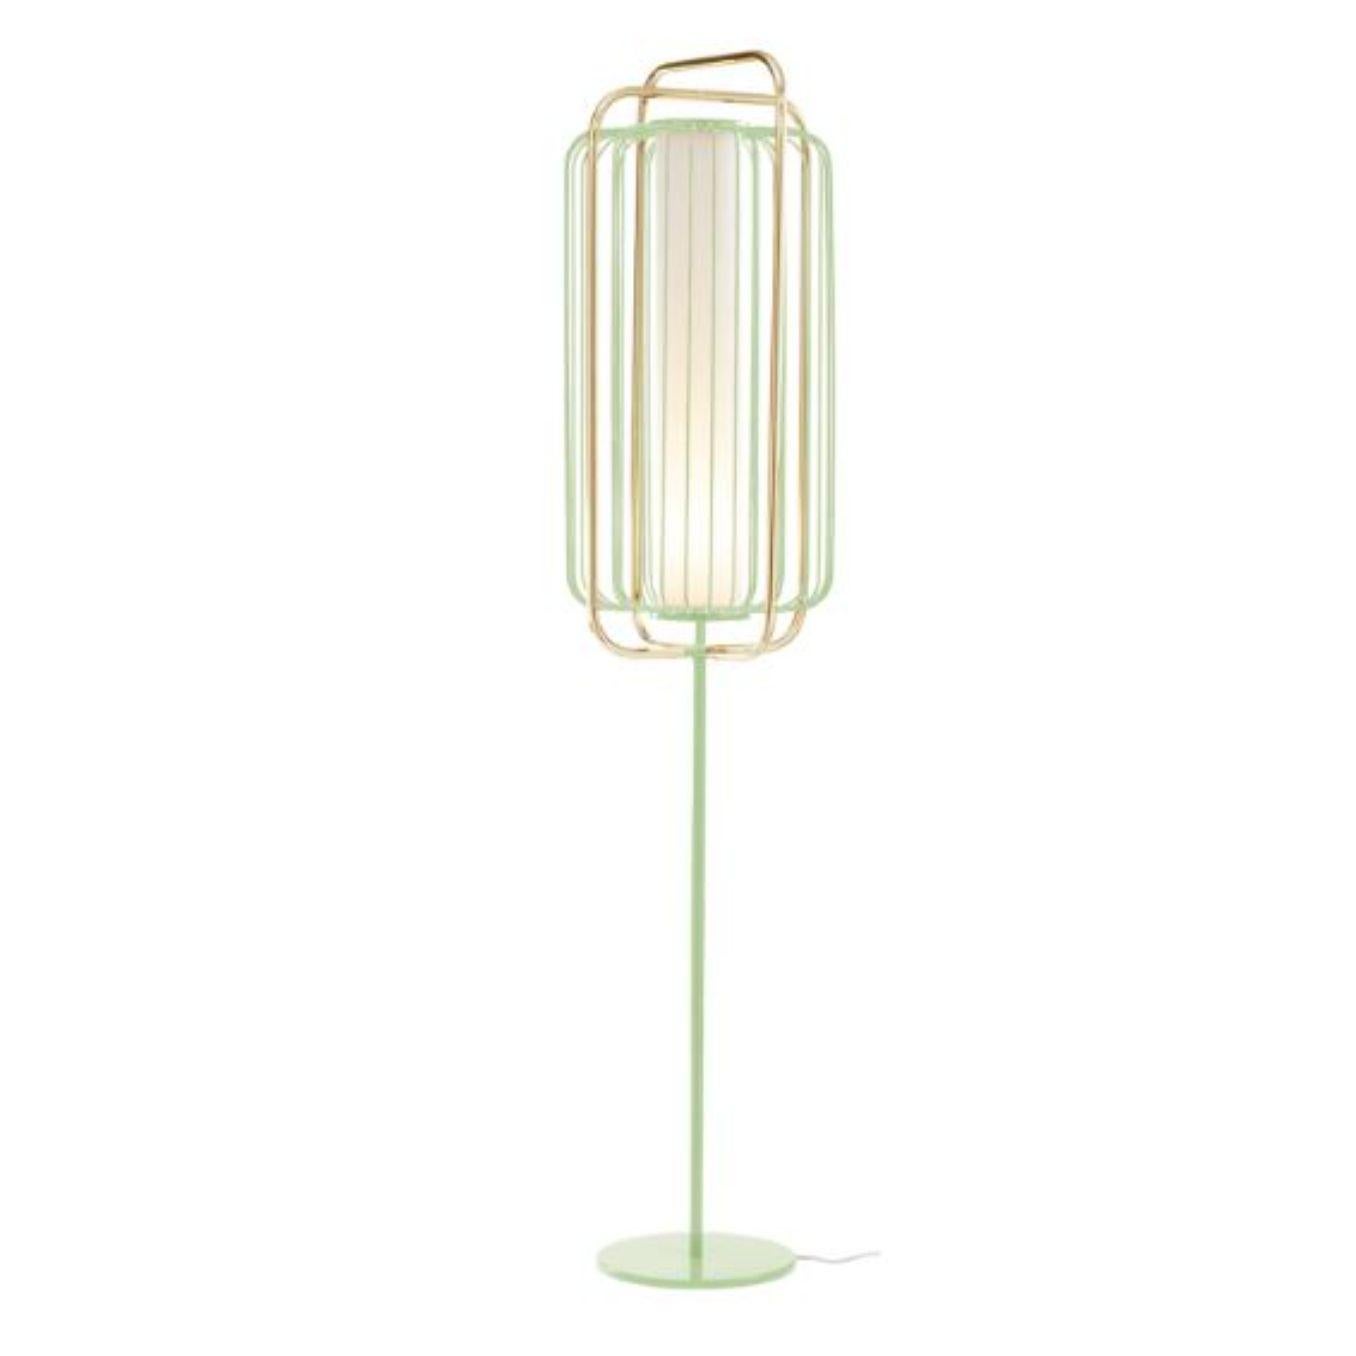 Brass and dream jules floor lamp by Dooq.
Dimensions: W 38 x D 38 x H 177 cm.
Materials: lacquered metal, polished or brushed metal, brass.
abat-jour: cotton
Also available in different colors and materials.

Information:
230V/50Hz
E27/1x20W